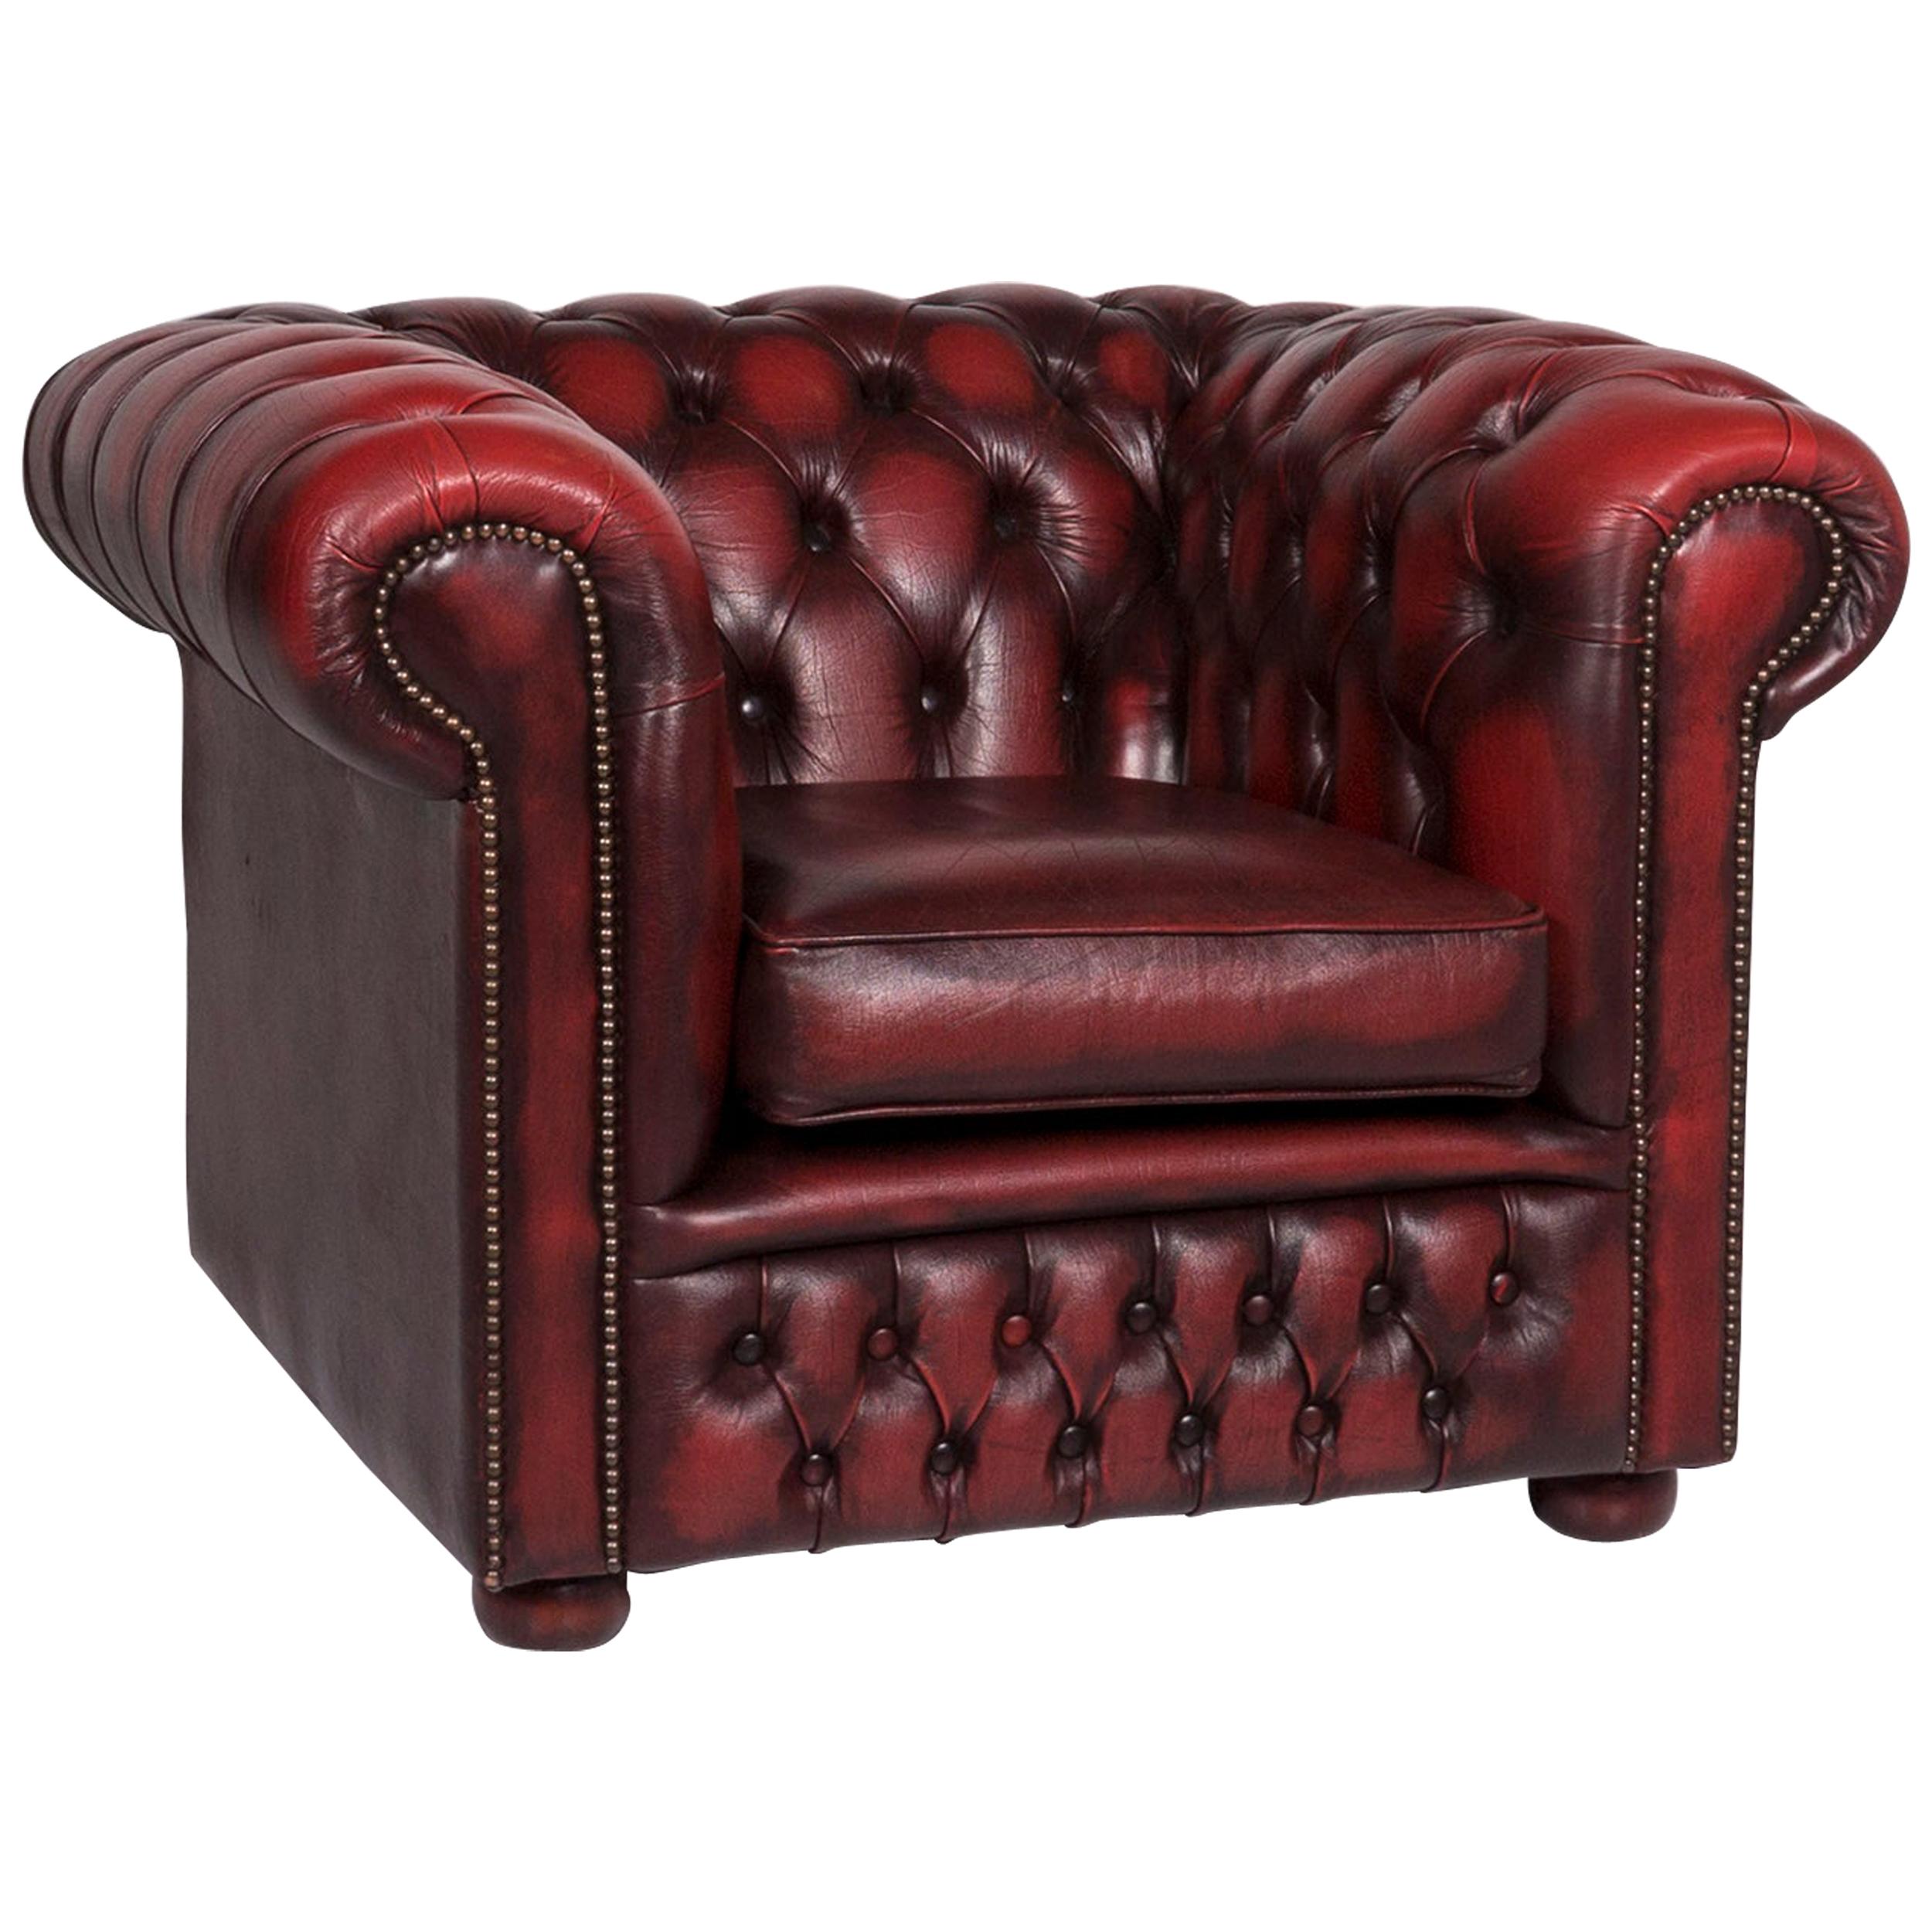 Chesterfield Leather Armchair Red Wine Red Retro